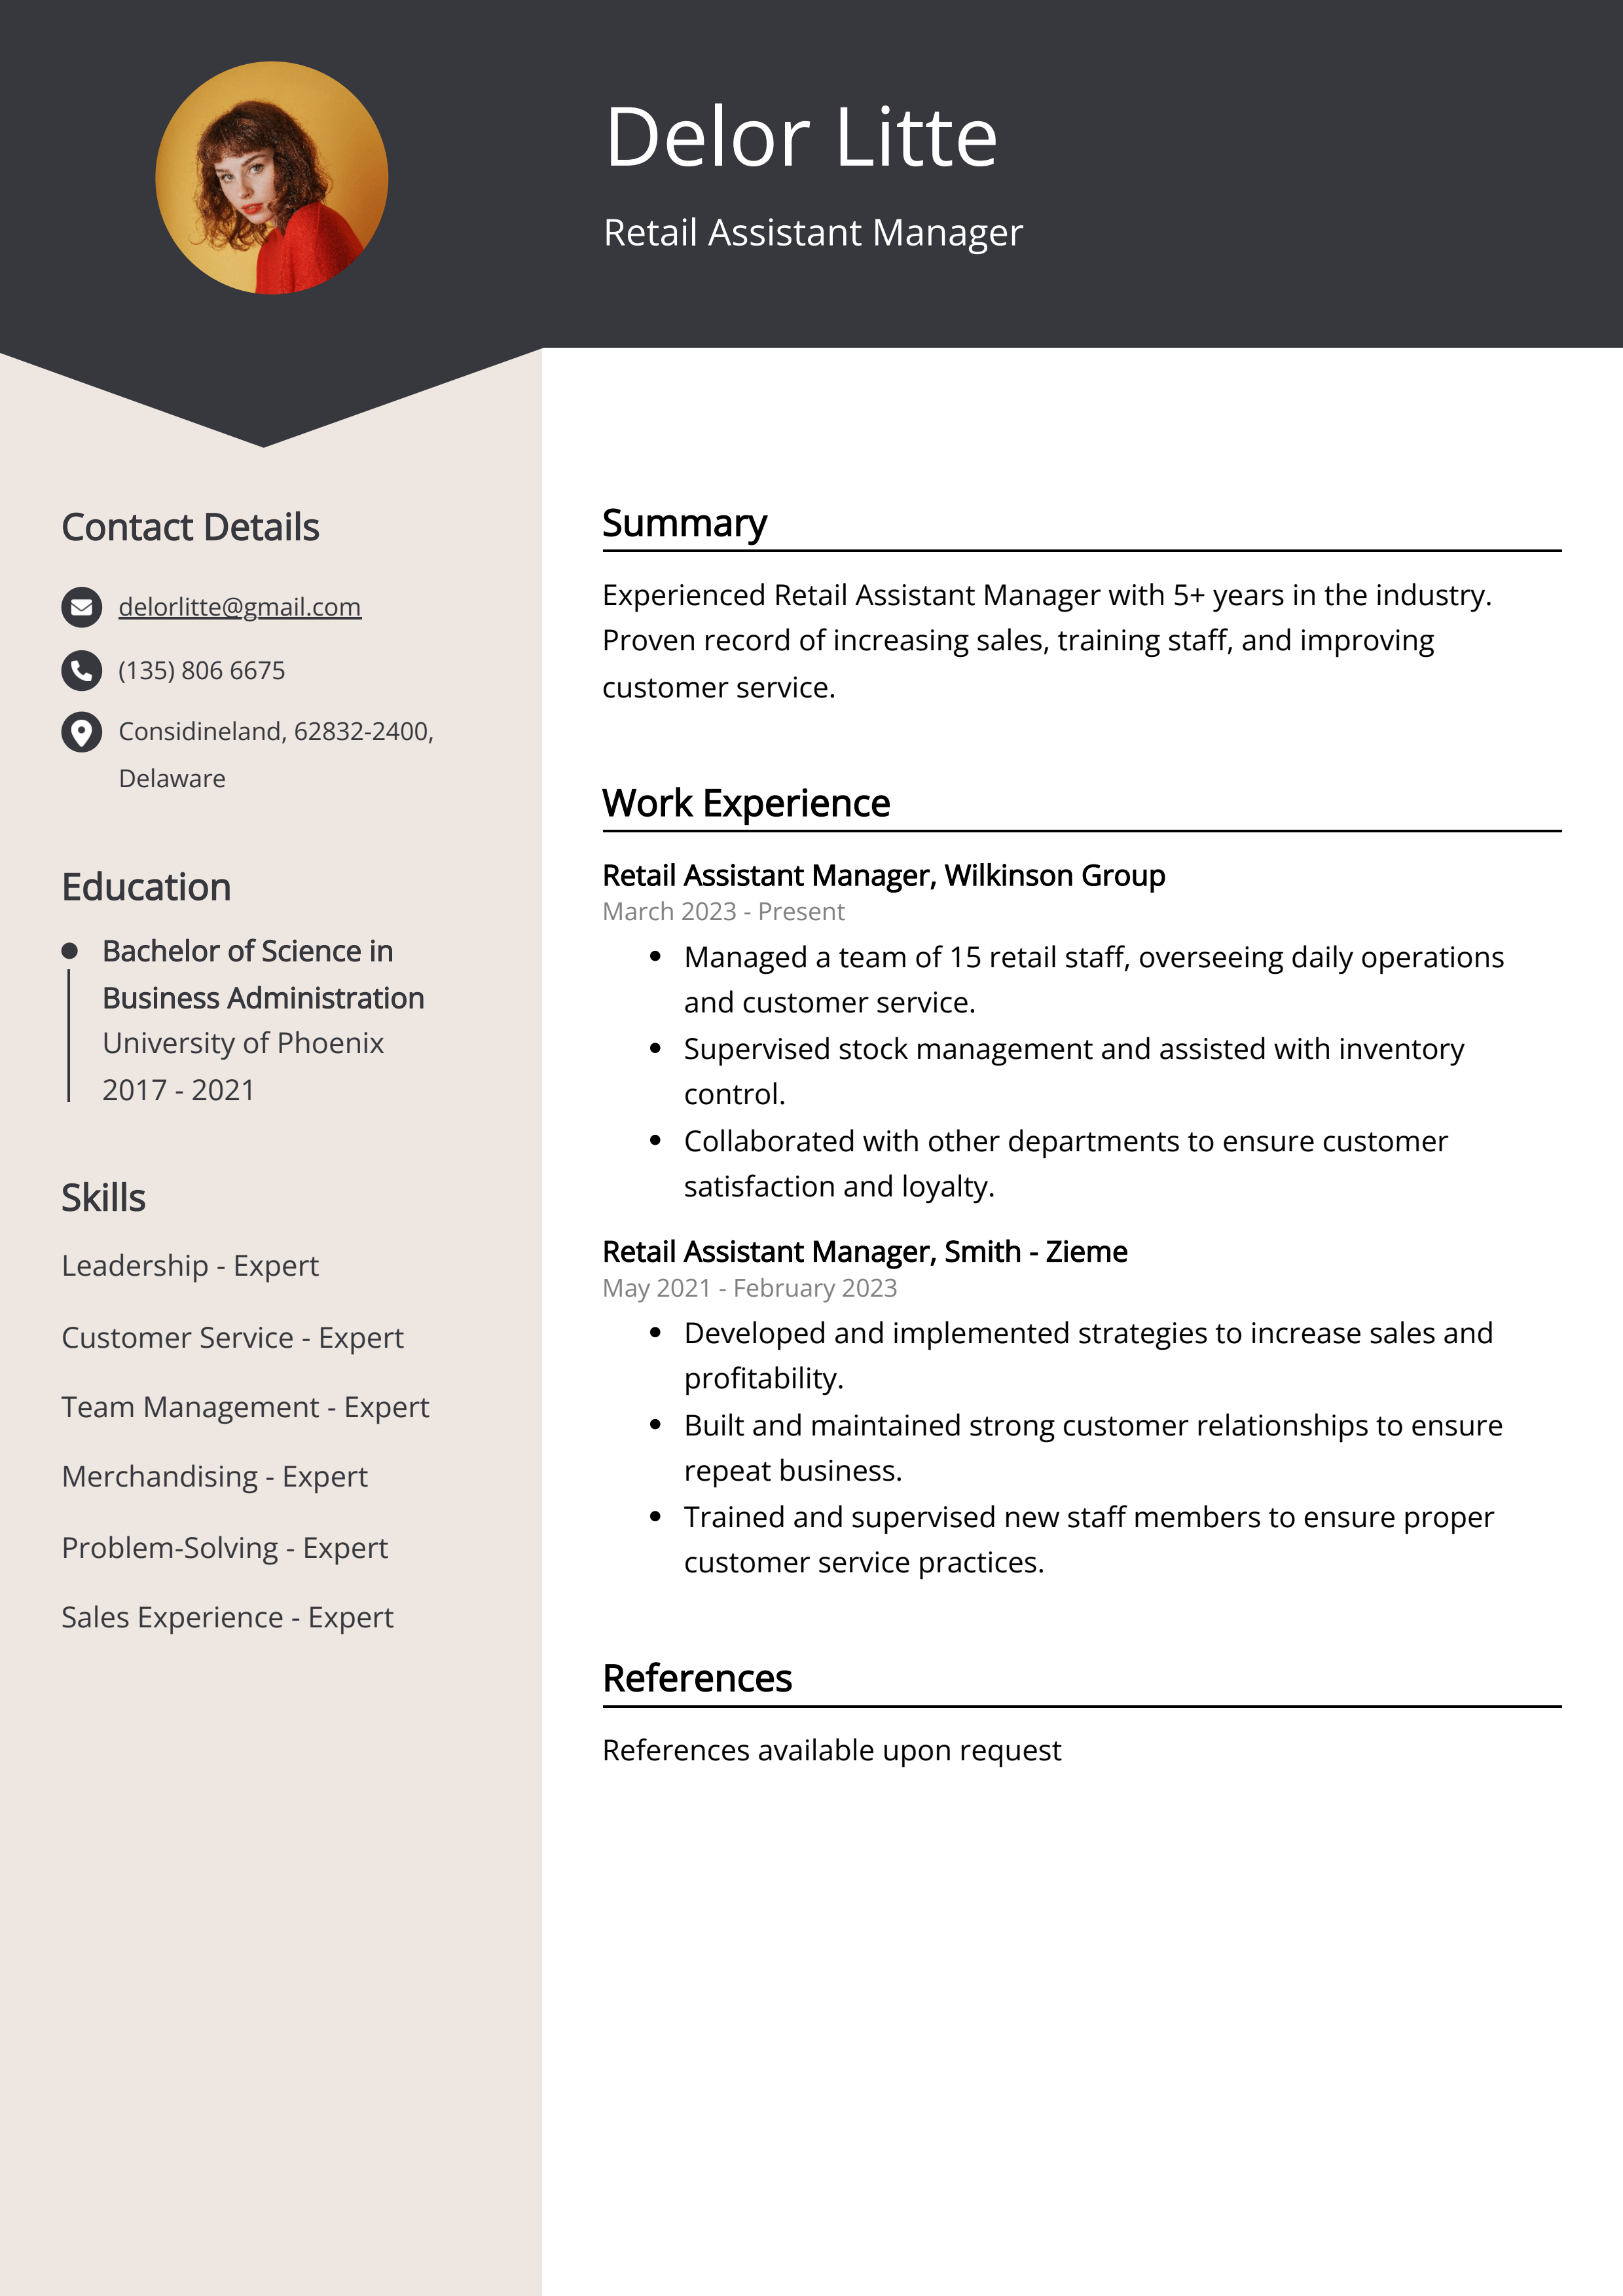 Retail Assistant Manager CV Example